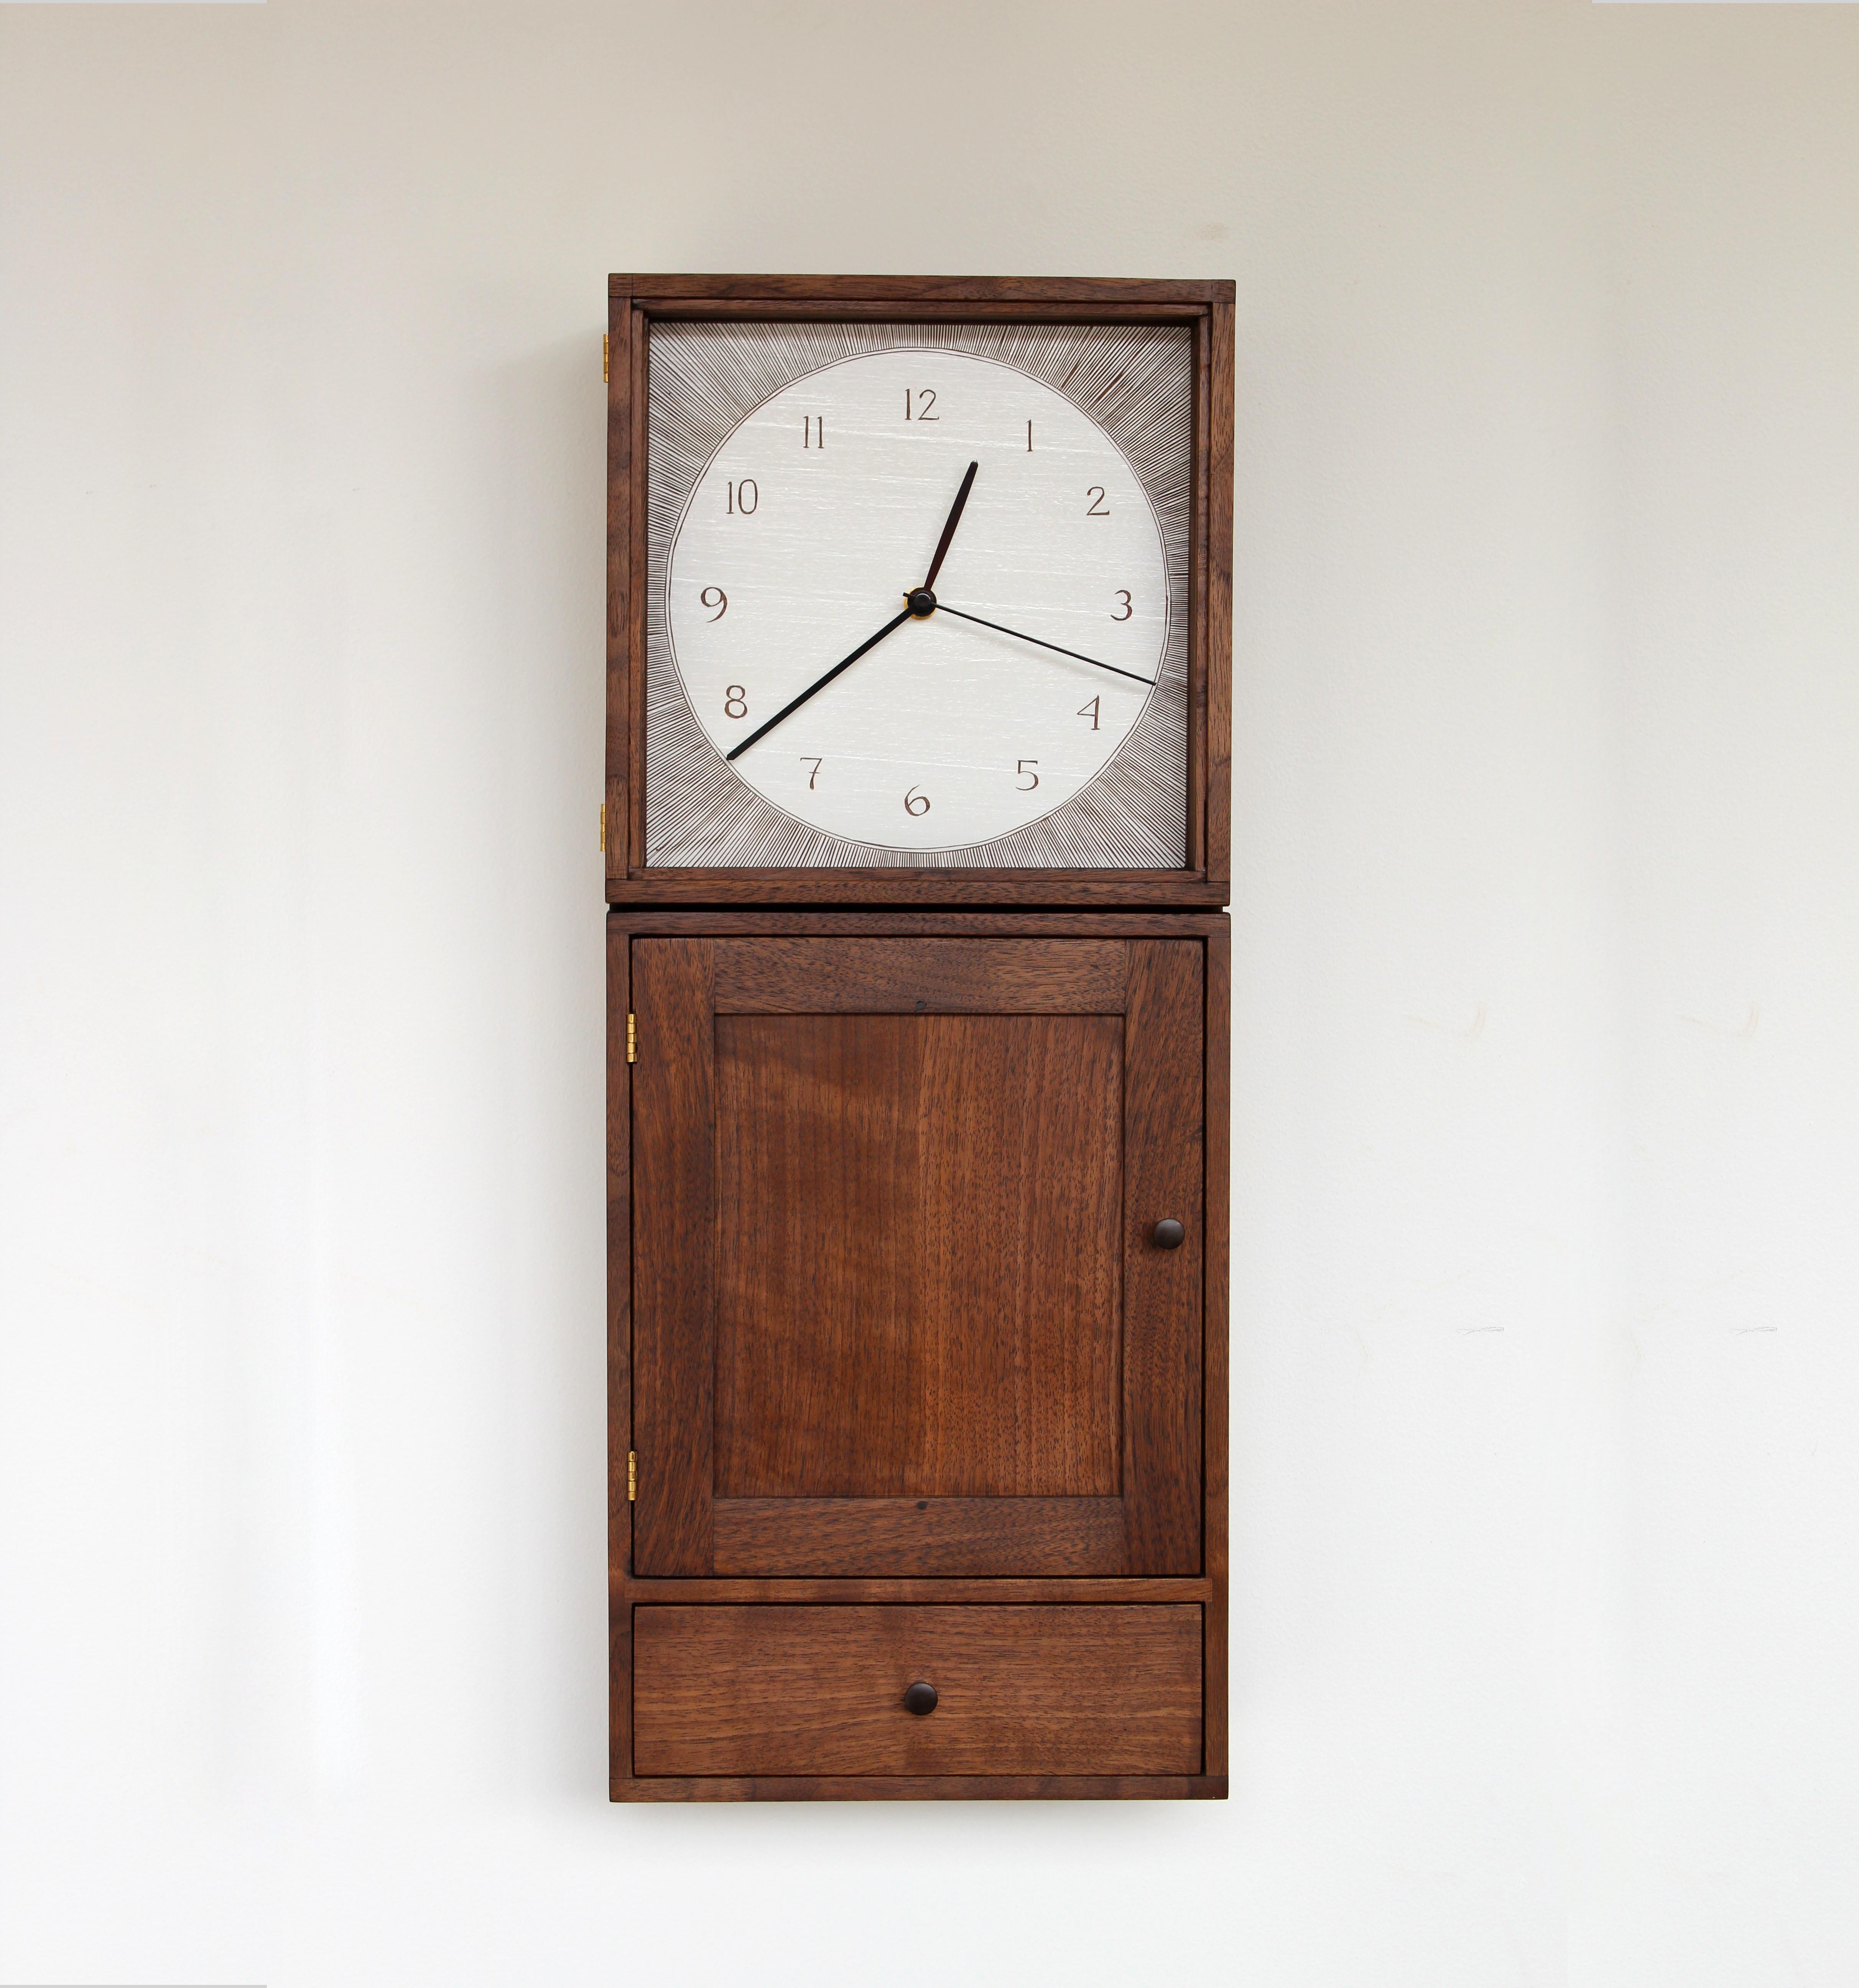 The Anniversary Clock is a contemporary take on a traditional Shaker wall-mounted clock cabinet. This updated form features hand-cut dovetail joinery, a painted and carved wooden clock face, and polished walnut pulls and pegs. The cabinet includes